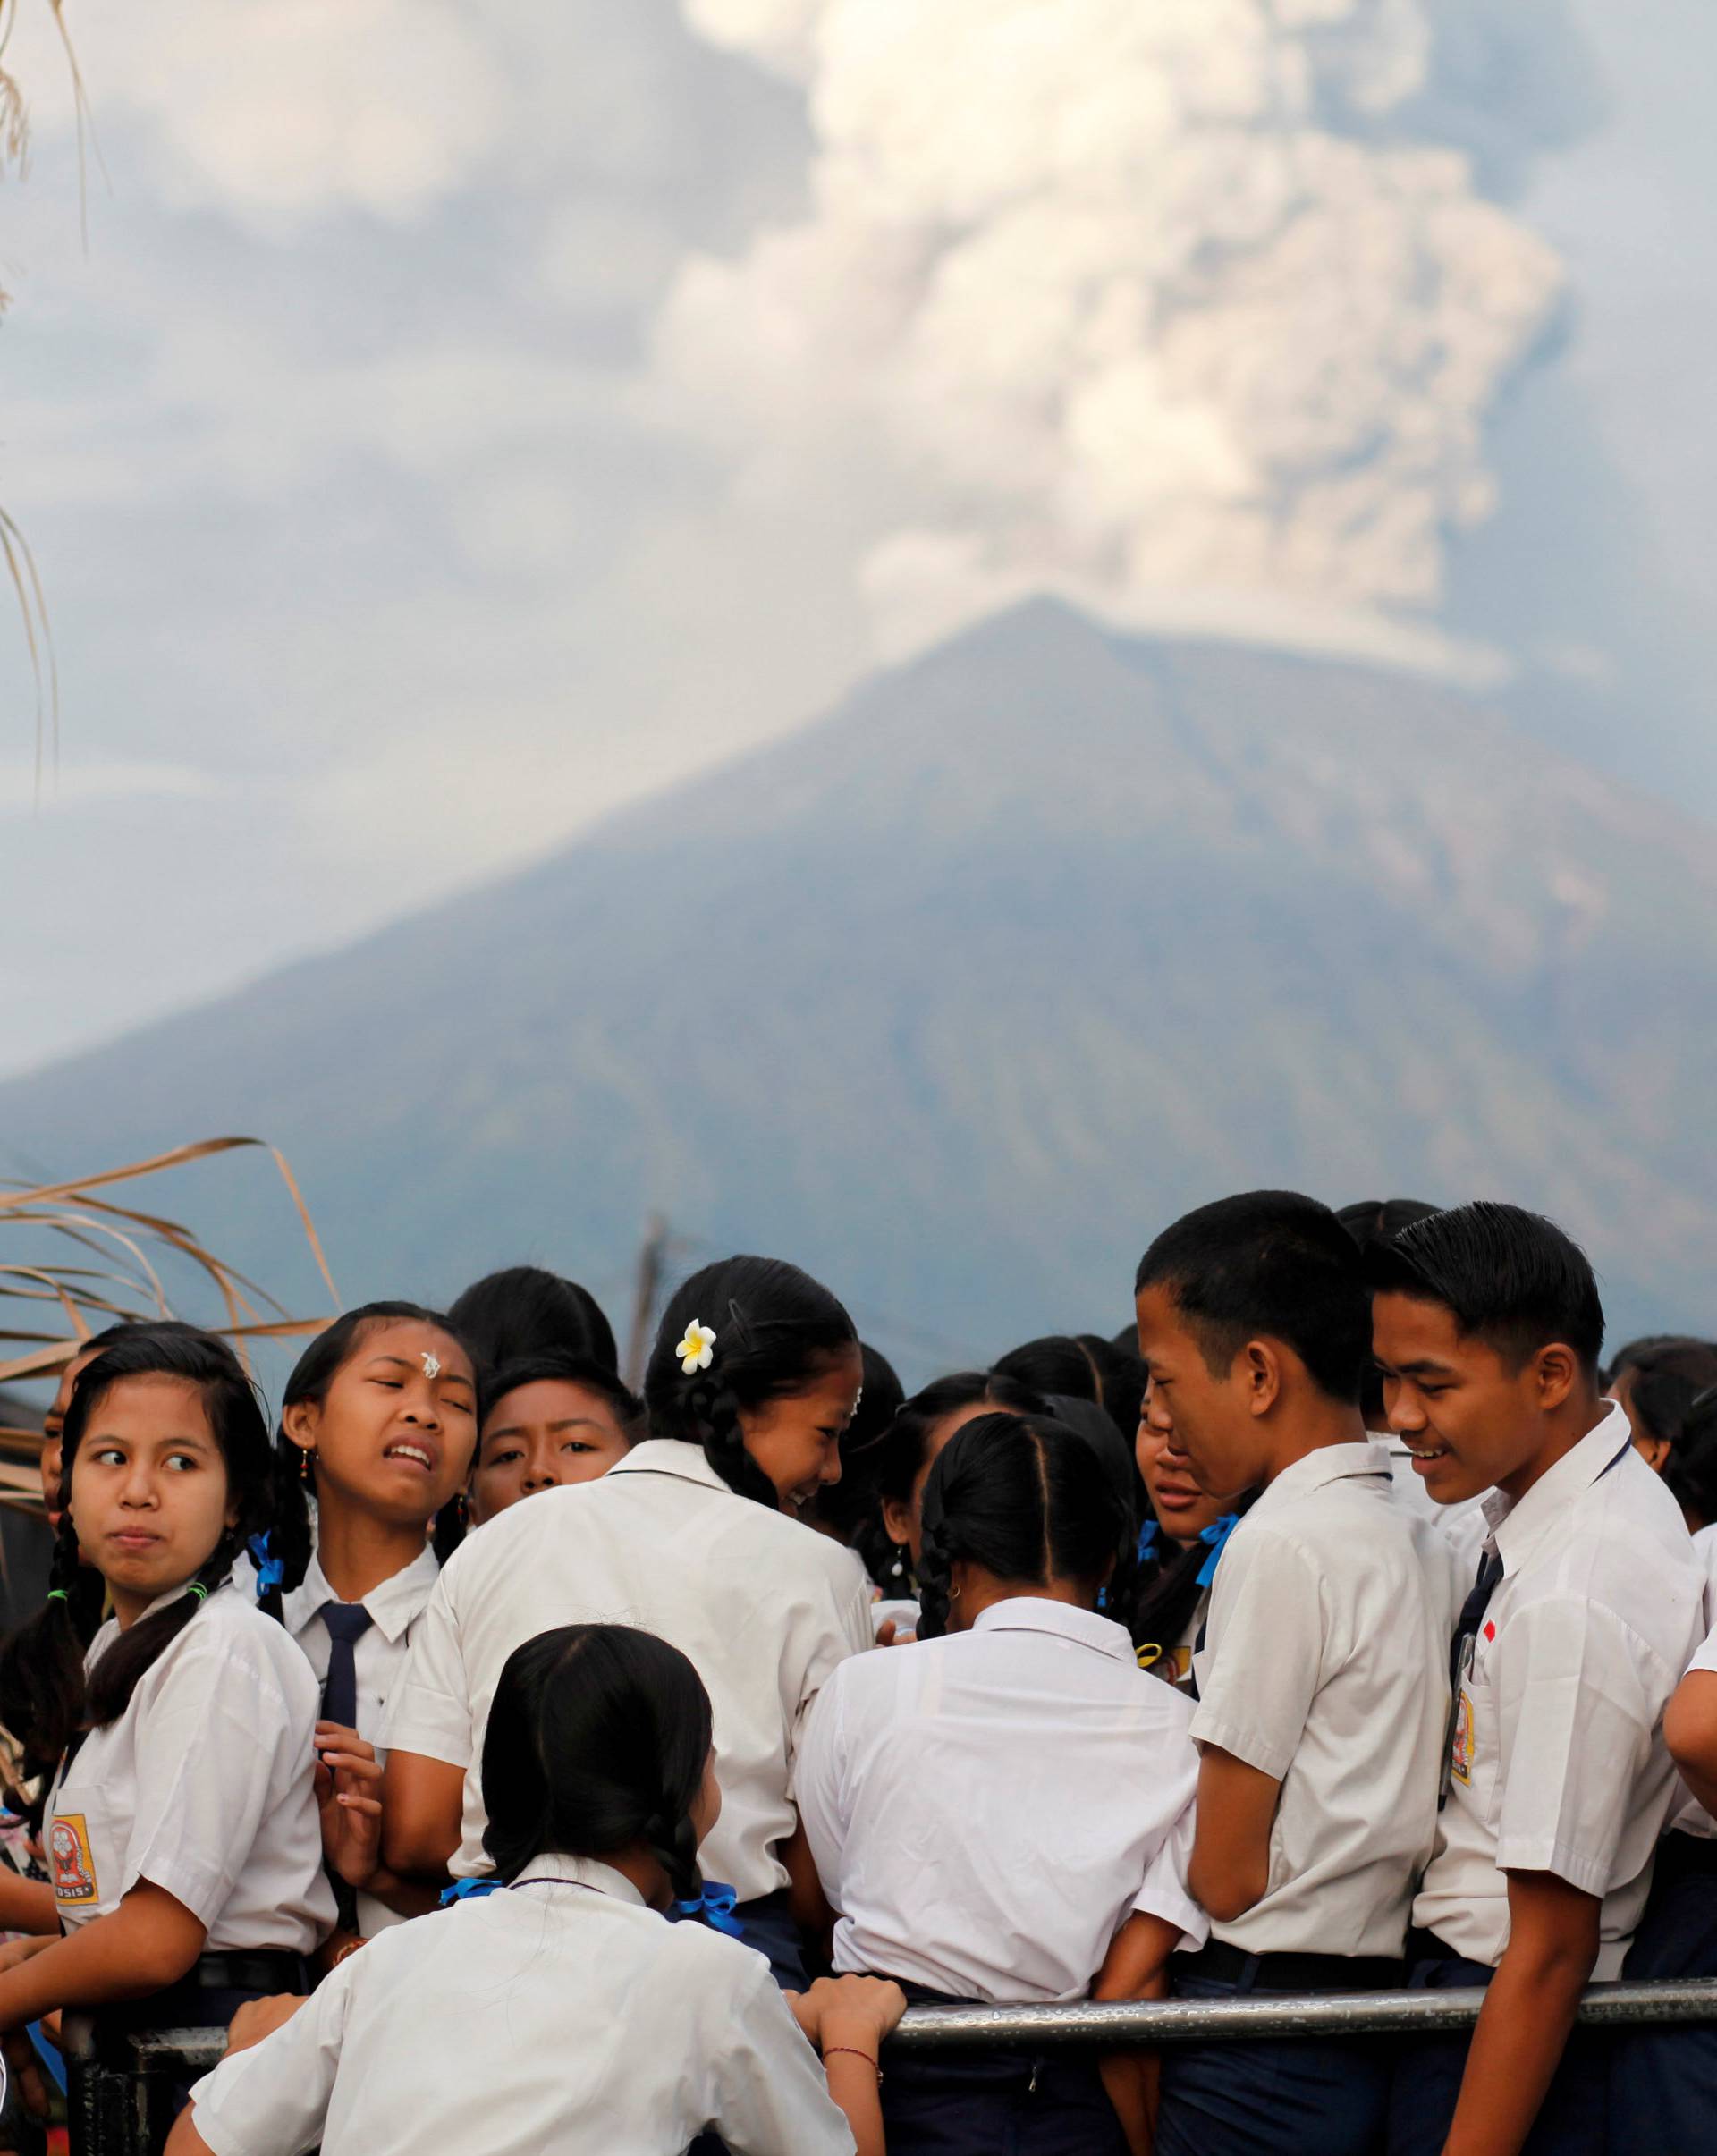 School children ride on the back of a truck on their way to school as Mount Agung volcano erupts in the background near Amed, Karangasem Regency, Bali